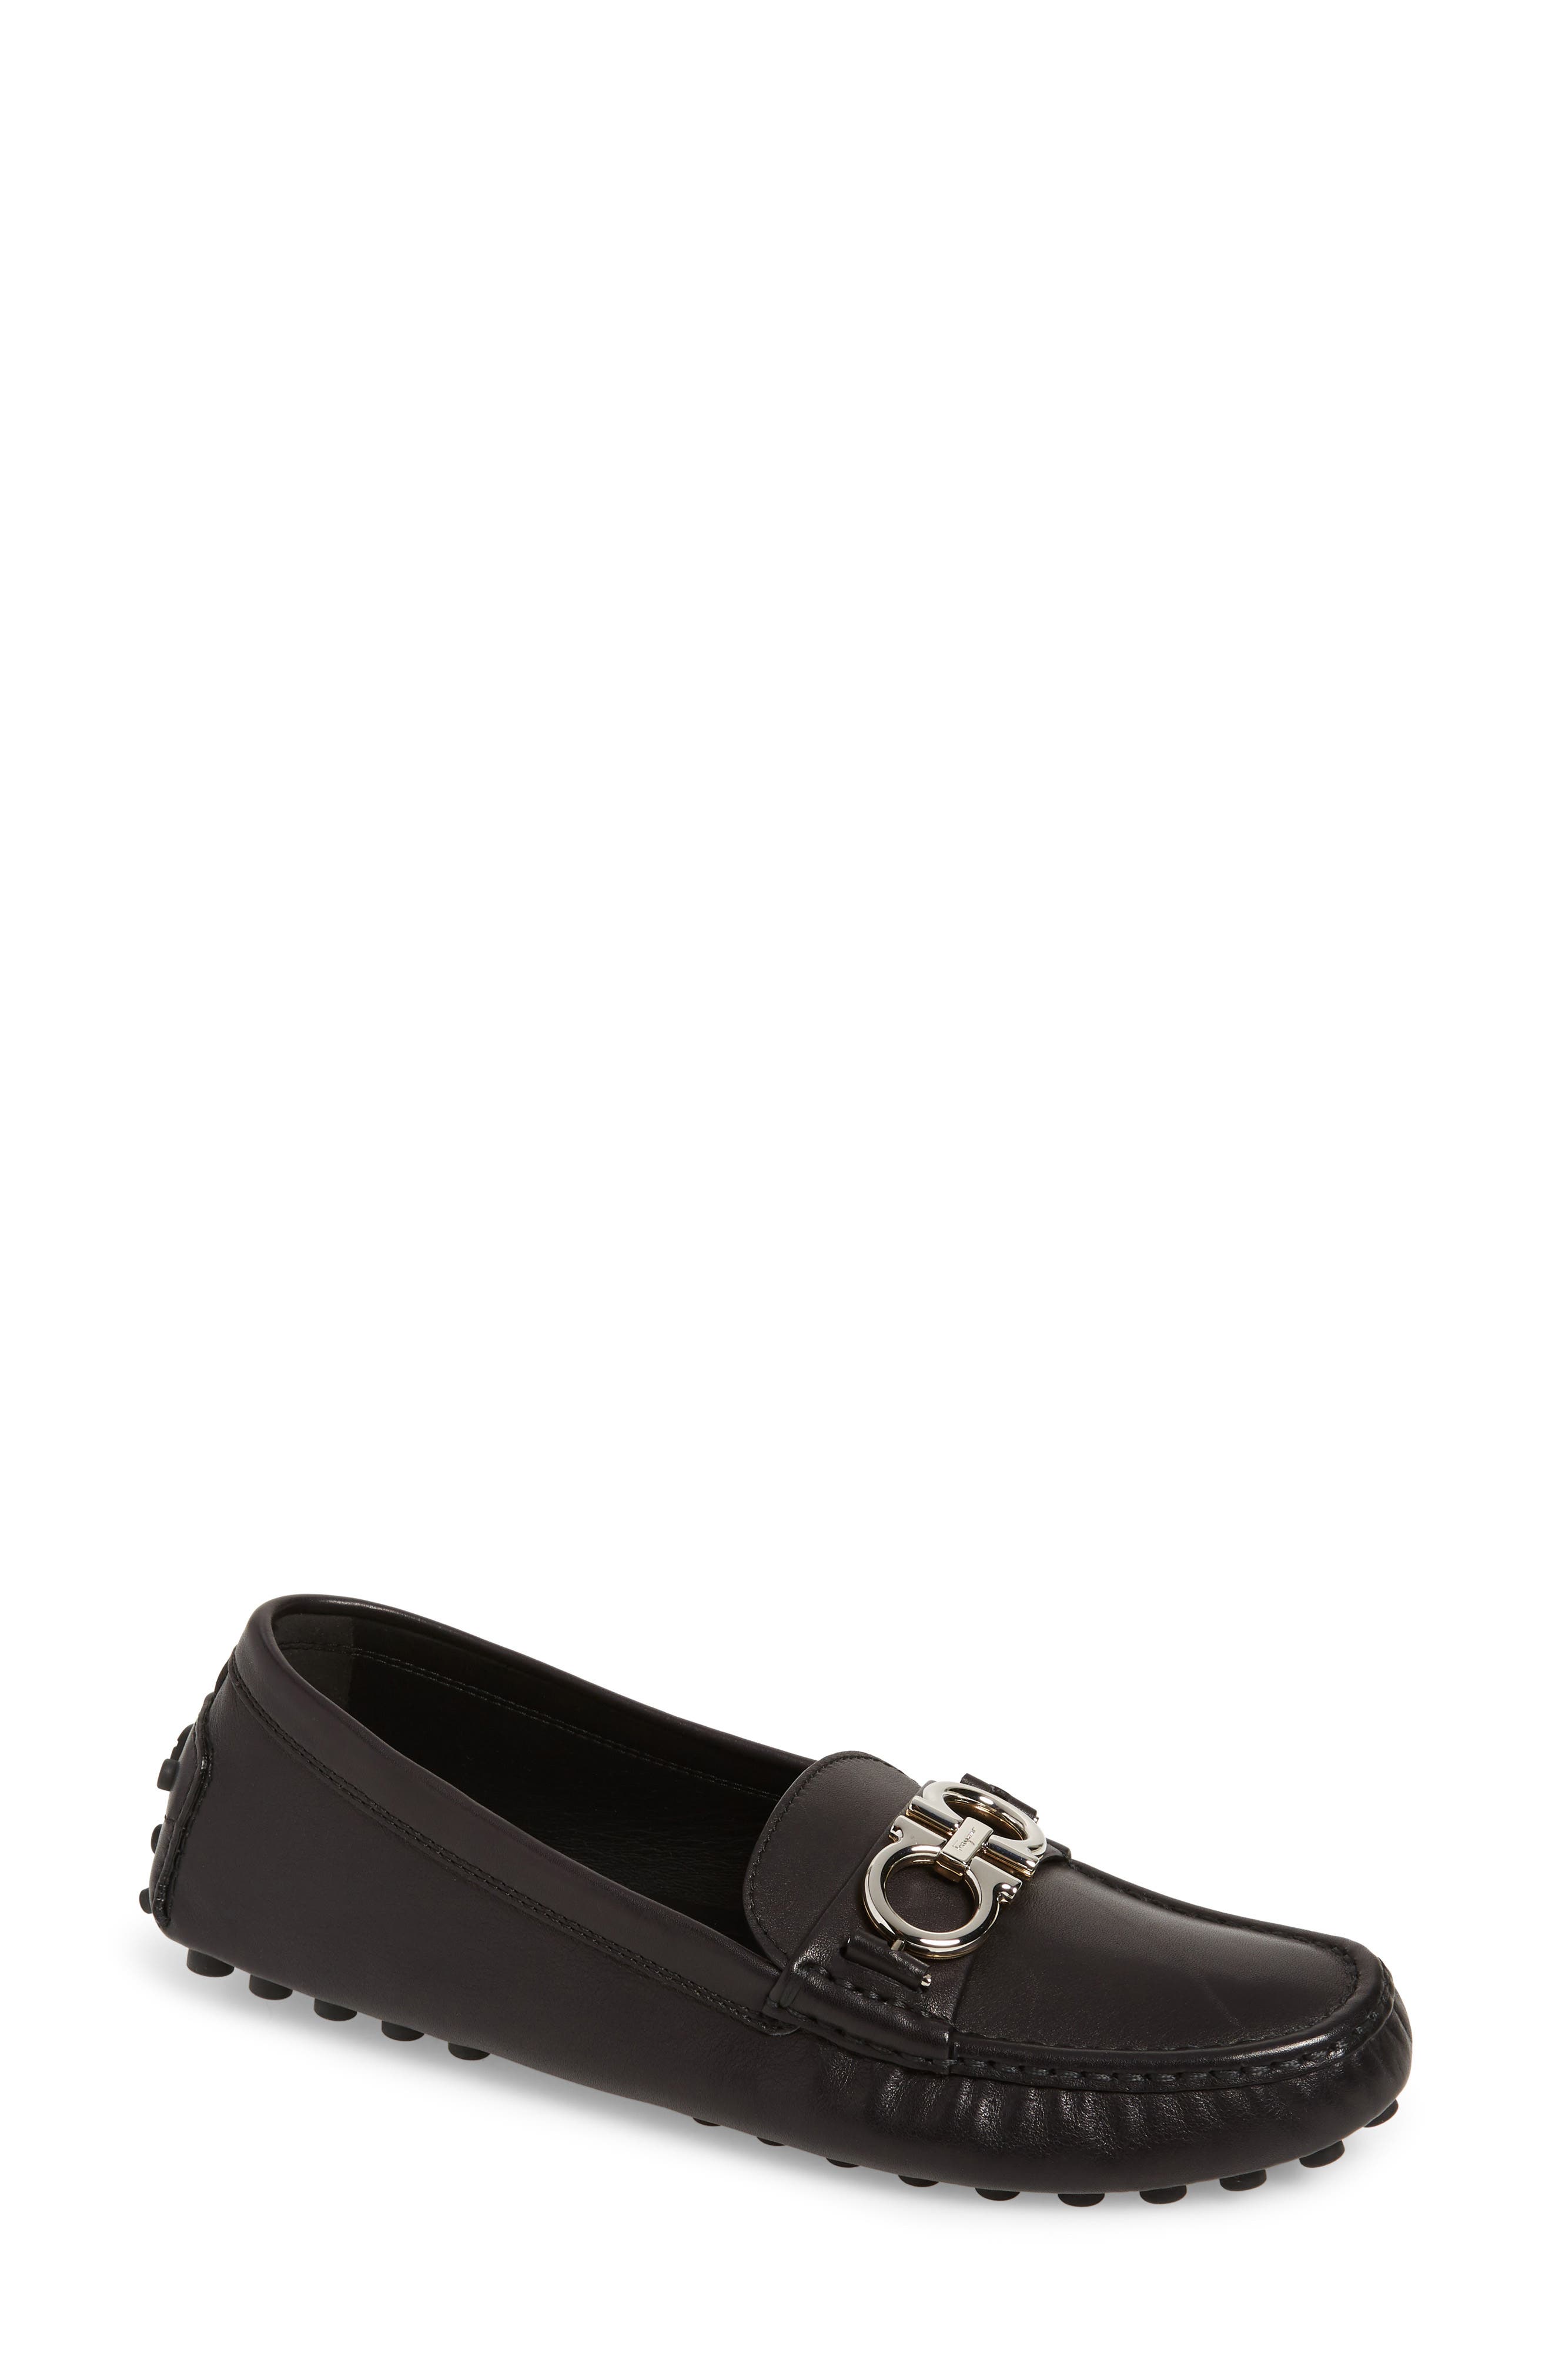 black driving loafers women's